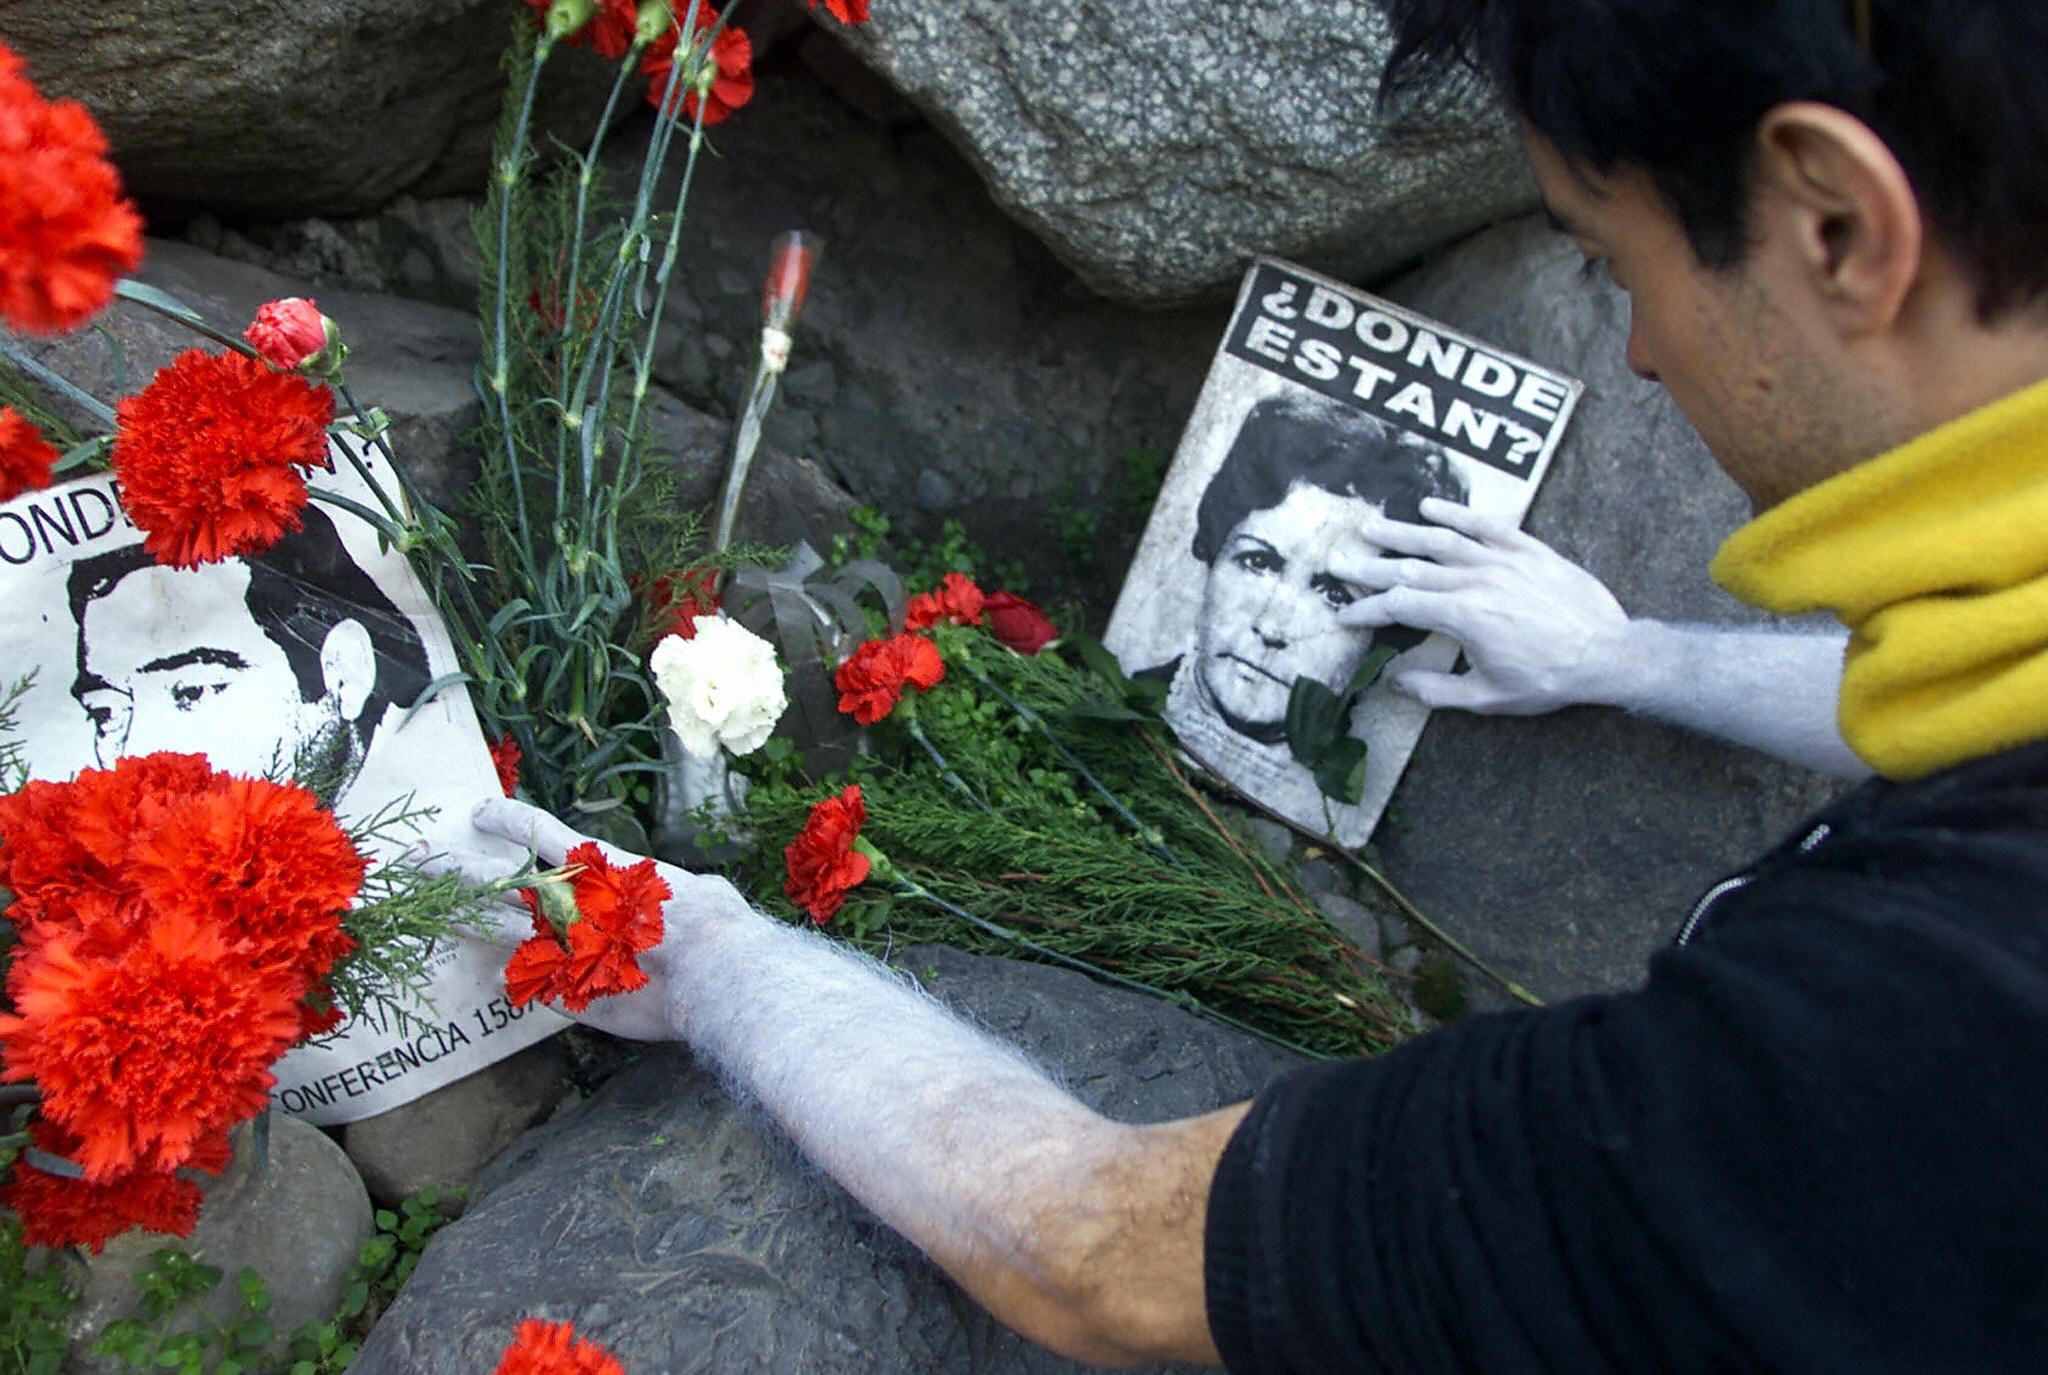 a man with white paint covering his hands and forearms places red flowers on the ground next to a photo of a woman who went missing during the Augusto Pinochet regime in Chile